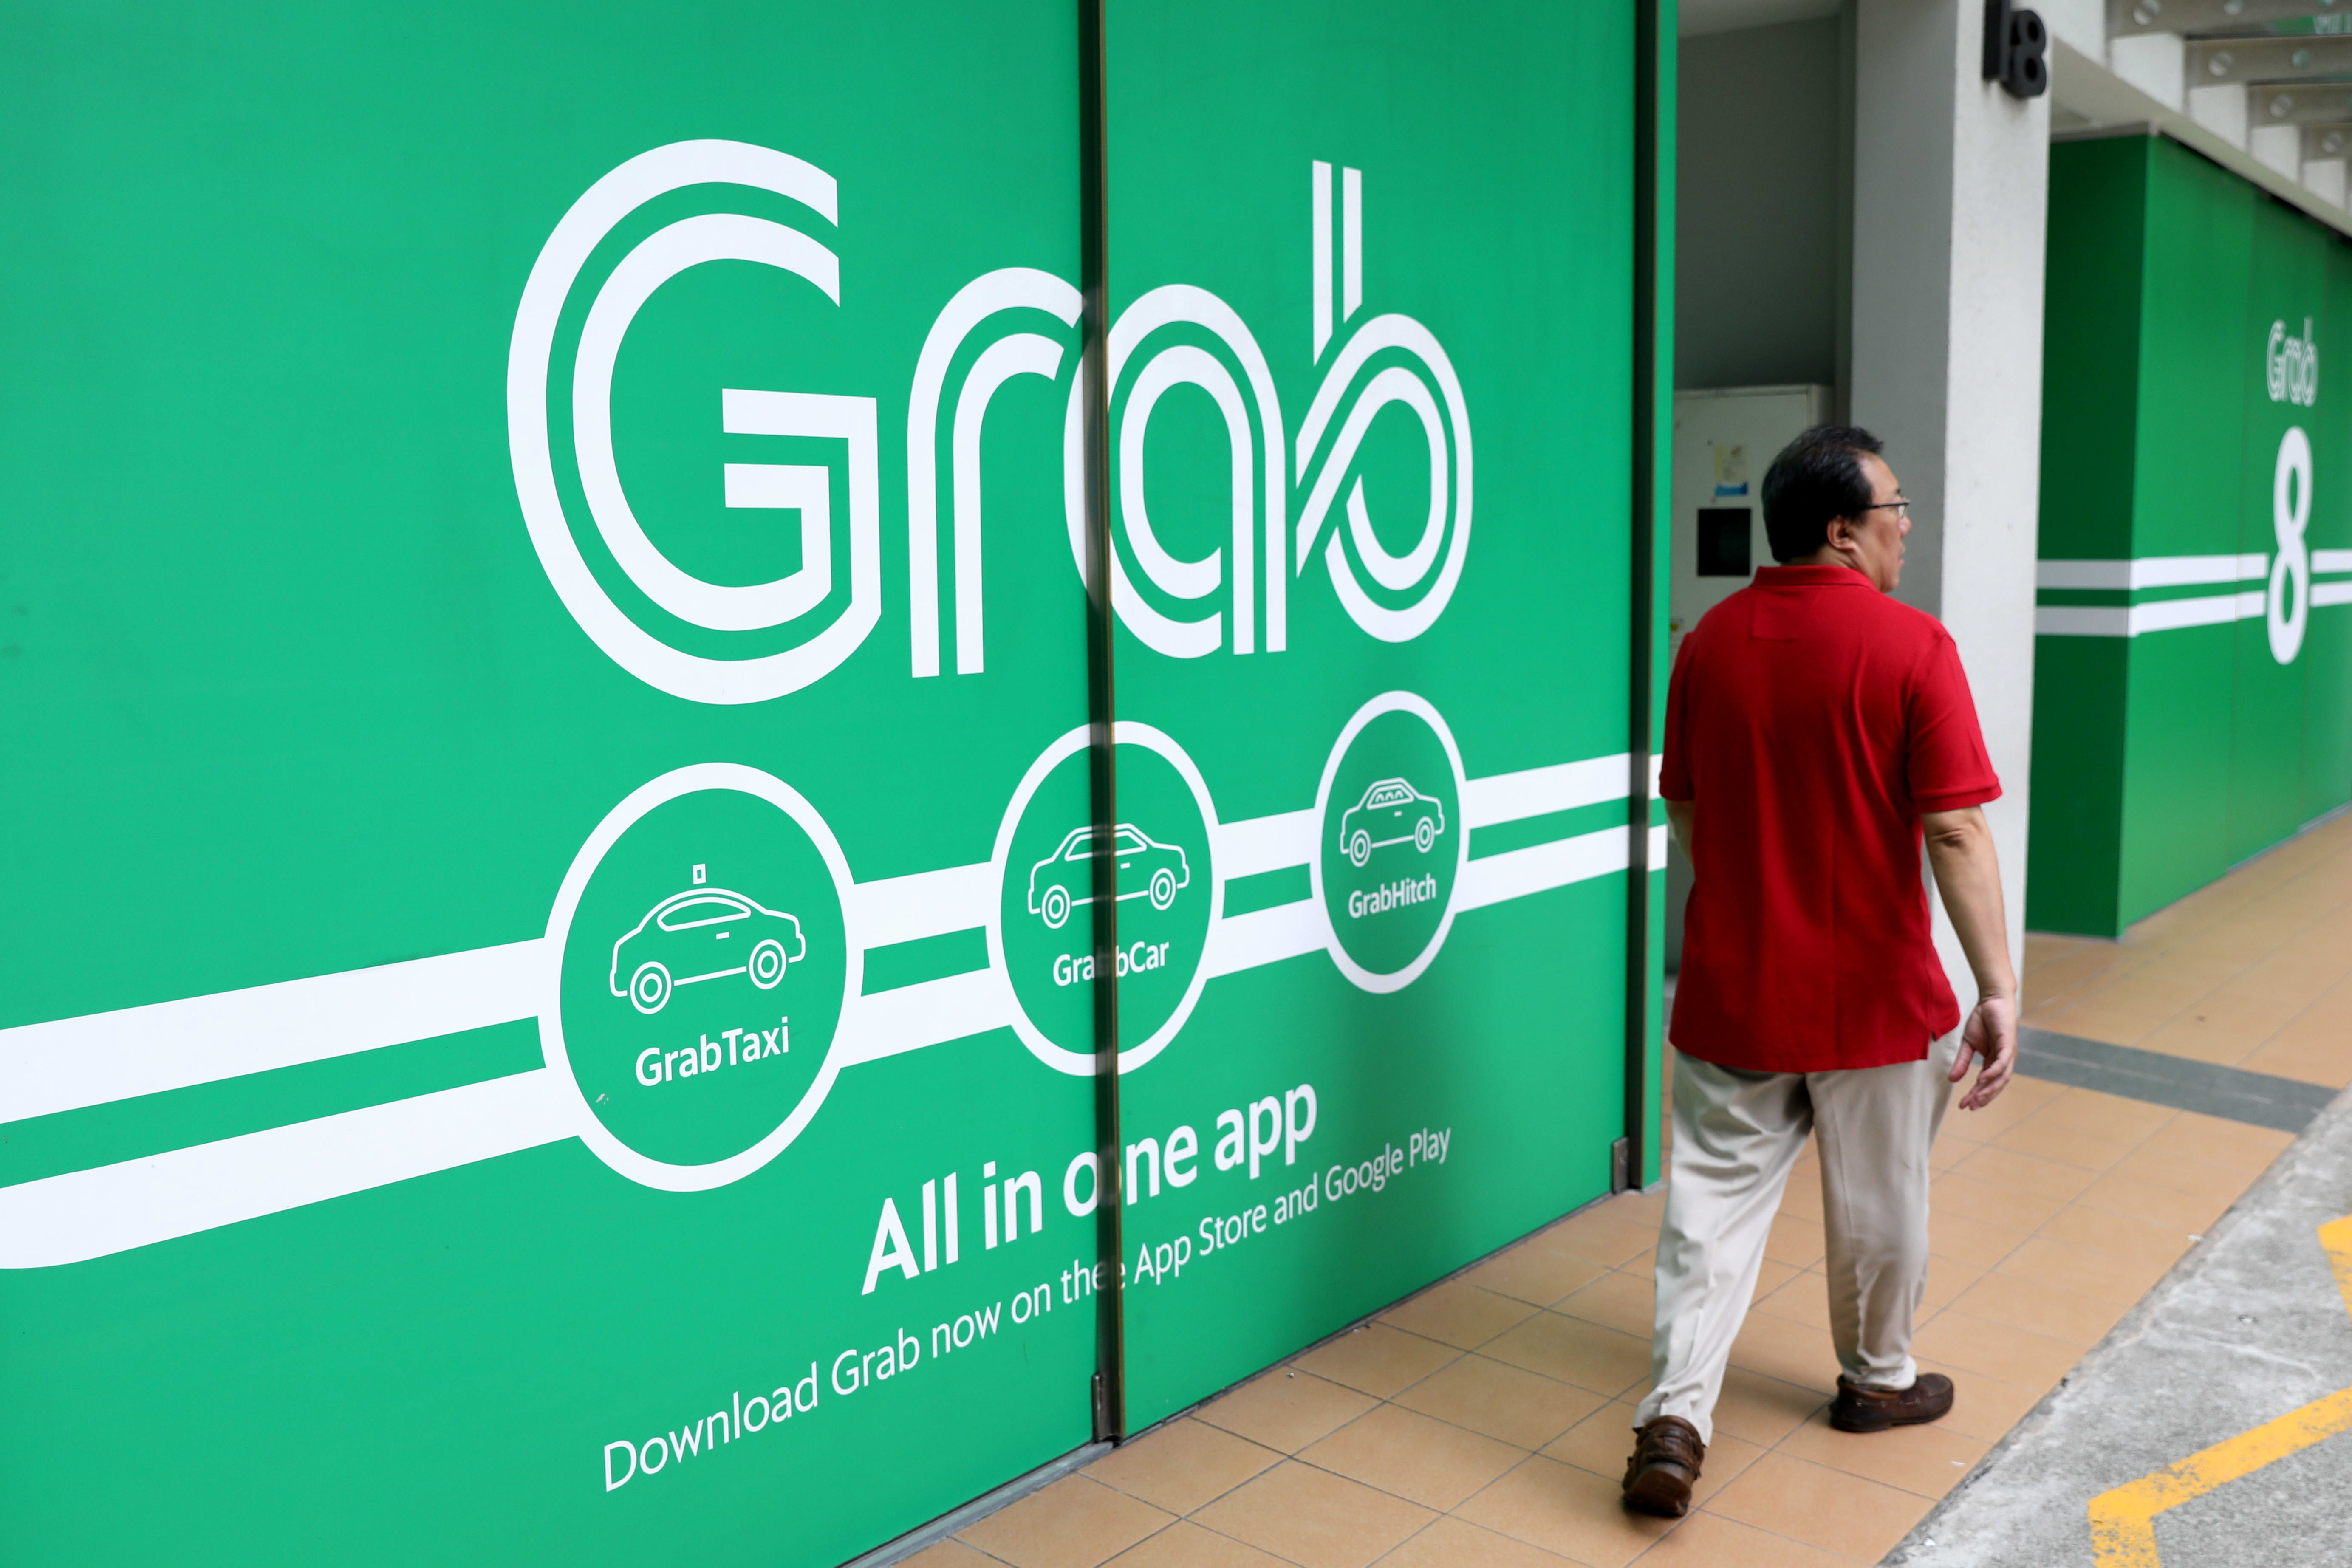 Grab, backed by SoftBank, agrees to trade in the world’s largest merger